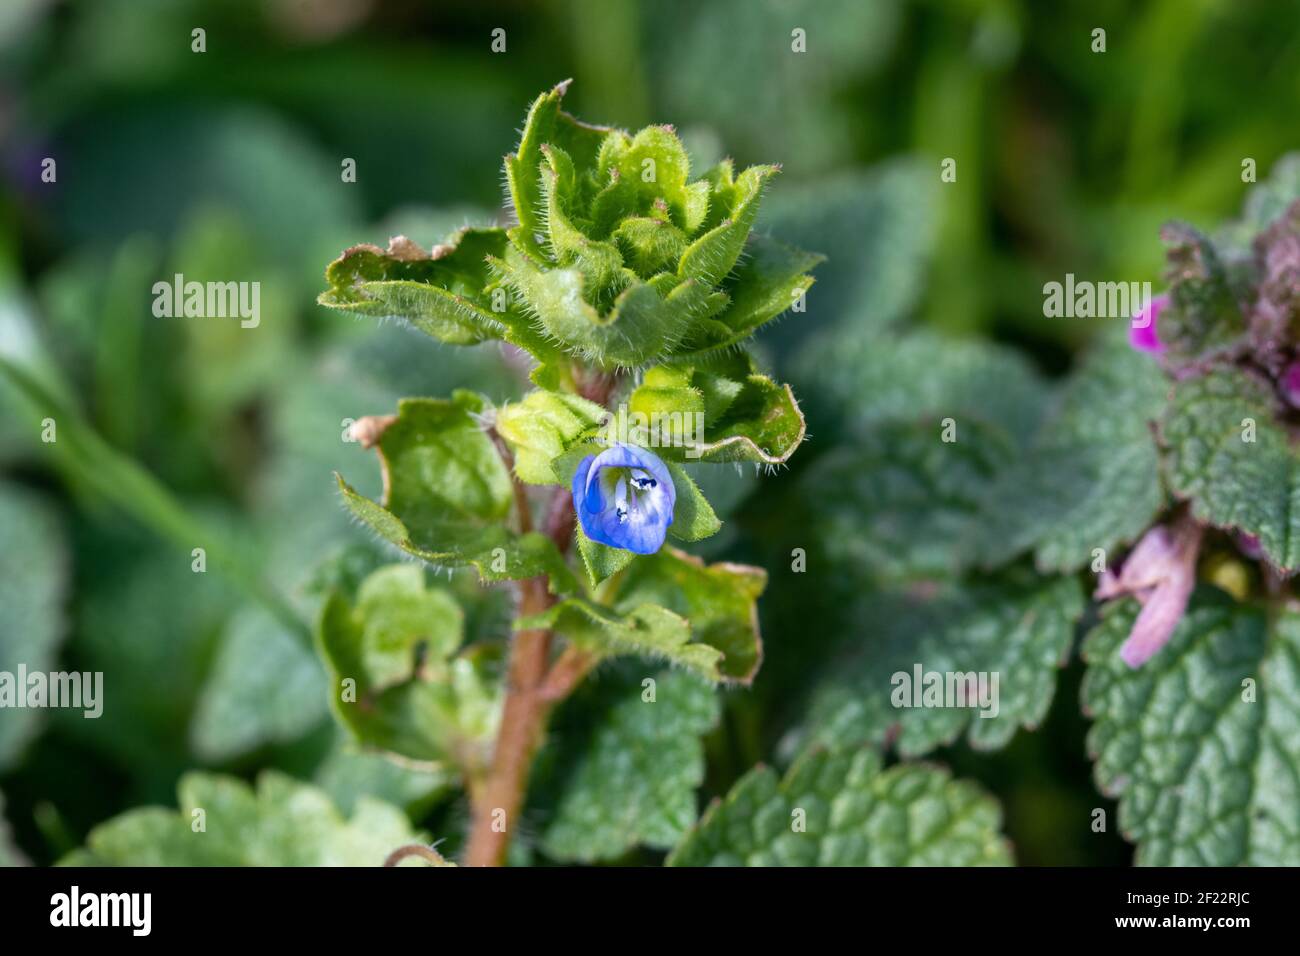 Persian speedwell, Veronica persica and purple deadnettle, Lamium purpureum bloom in early spring. They are wildflowers and medicinal plants. Stock Photo